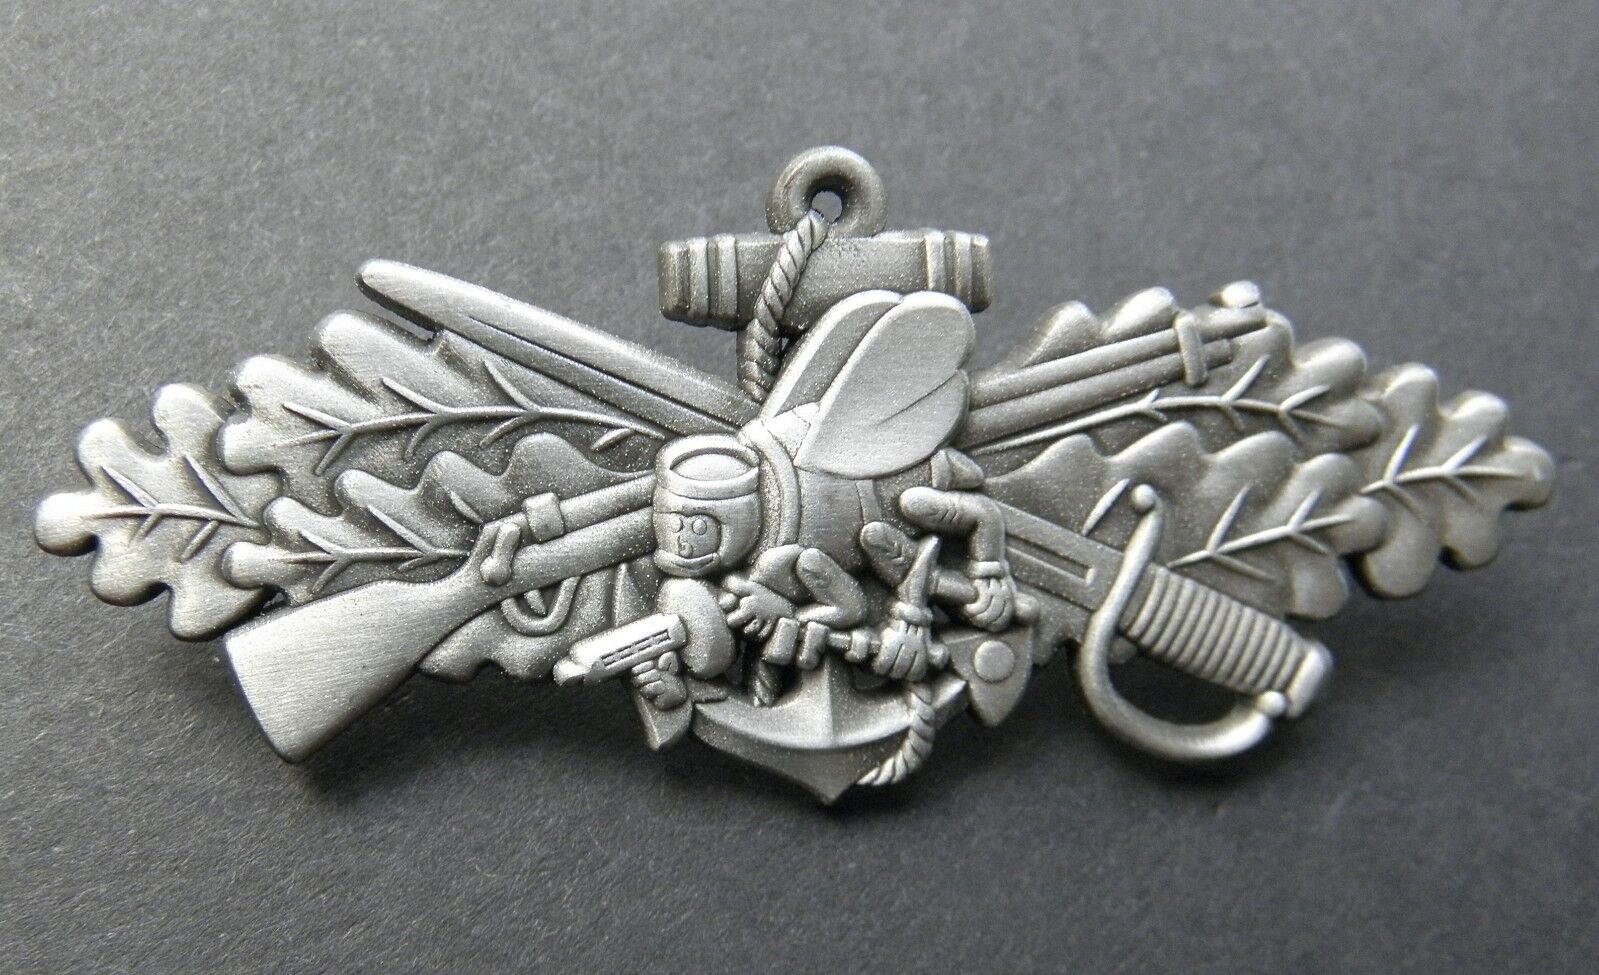 USN NAVY SEABEES SEABEE COMBAT WARFARE SCW INSIGNIA LAPEL PIN BADGE 2.75 INCHES